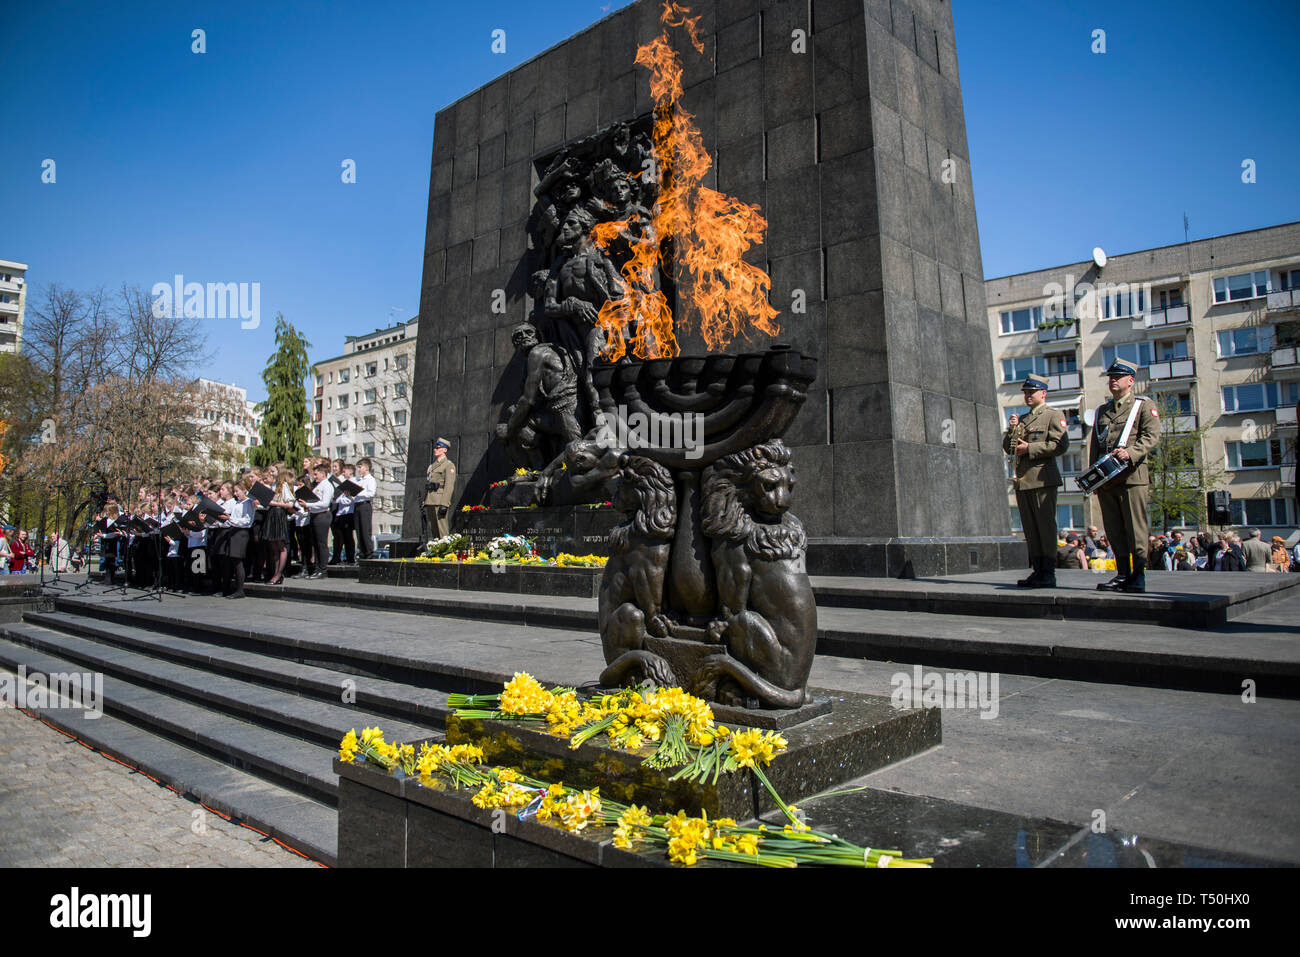 A view of The monument to Warsaw Heroes of the Ghetto during a ceremony to mark the 76th anniversary of the outbreak of the Warsaw Ghetto Uprising. As part of the ceremony alarm sirens were heard throughout the city to remember those who were murdered in the ghetto in 1943. The Warsaw ghetto uprising was a violent revolt that occurred from April 19 to May 16, 1943, during World War II. Residents of the Jewish ghetto in Nazi-occupied Warsaw, Poland, staged the armed revolt to prevent deportations to Nazi-run extermination camps. Stock Photo